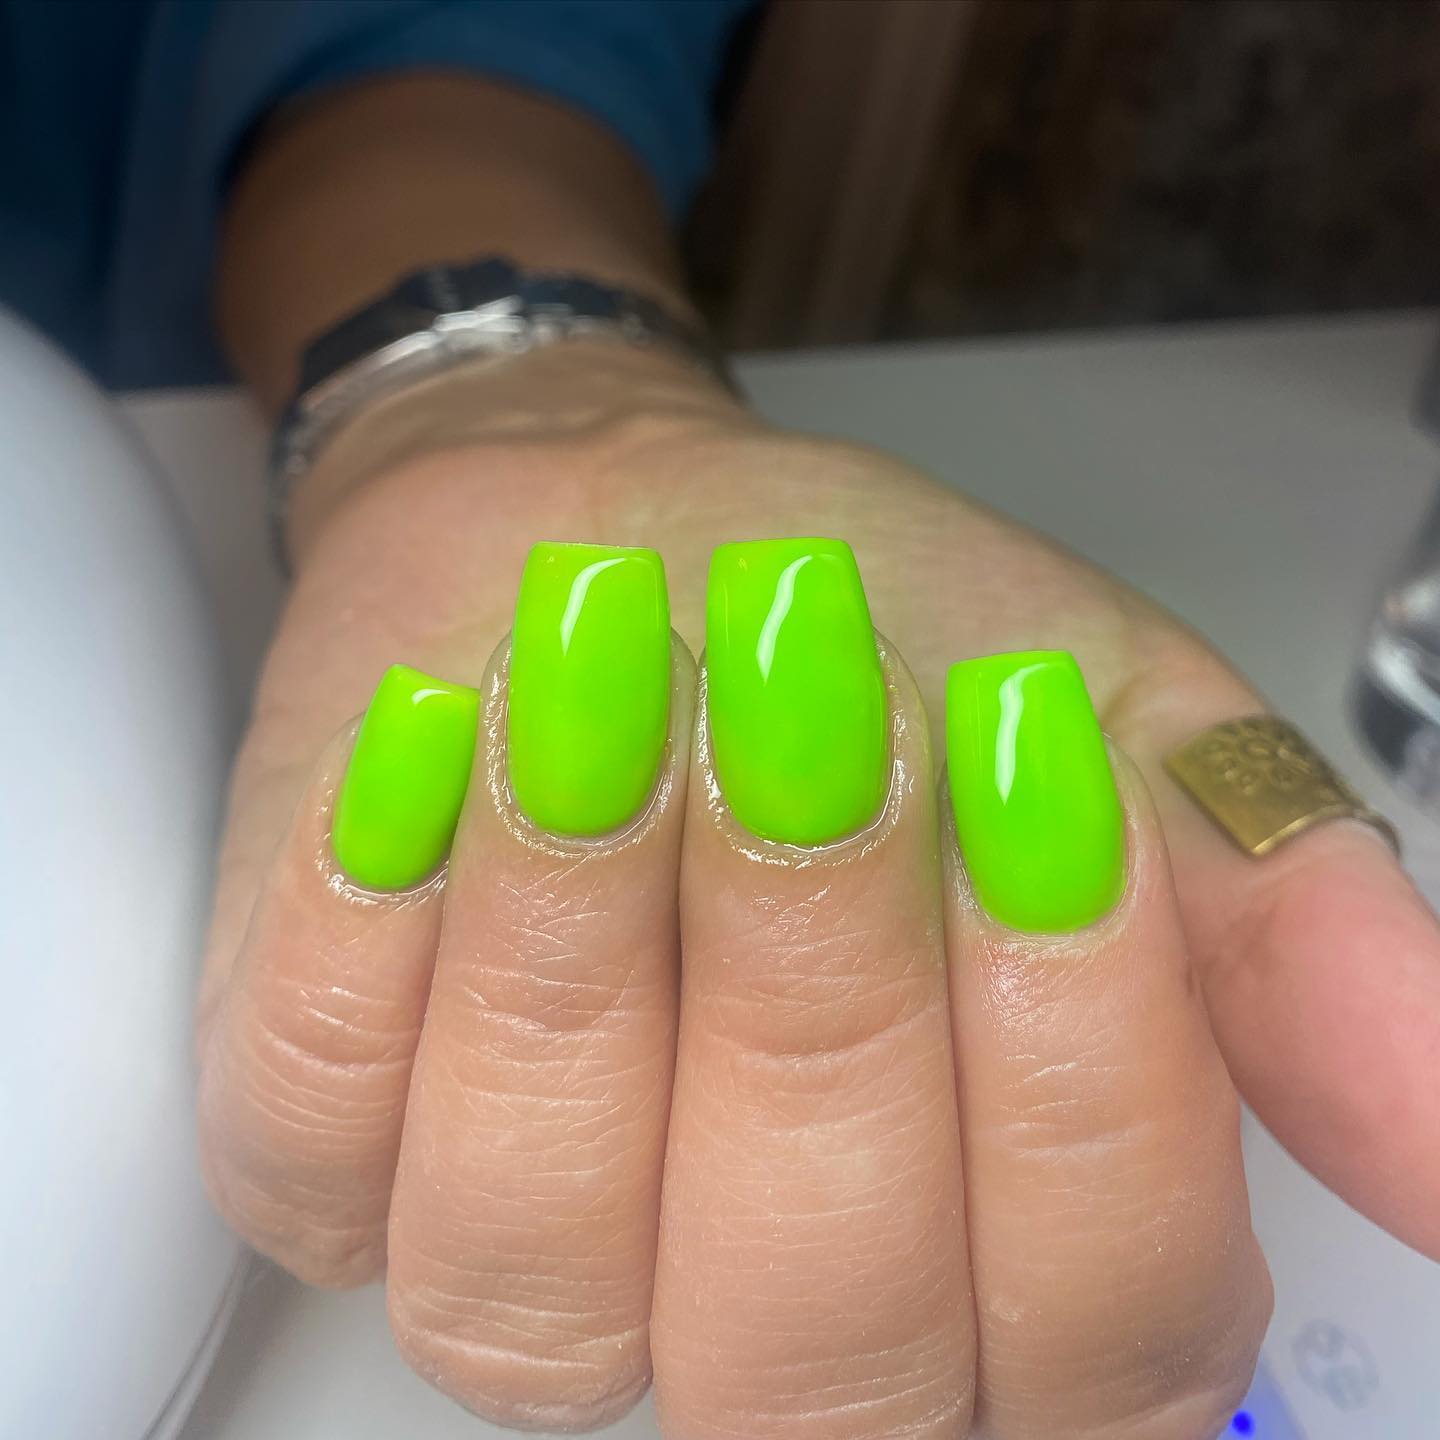 When you look at this image, you can feel the super energy of this neon green color. If you want to feel this energy, make your nail appointment quickly.